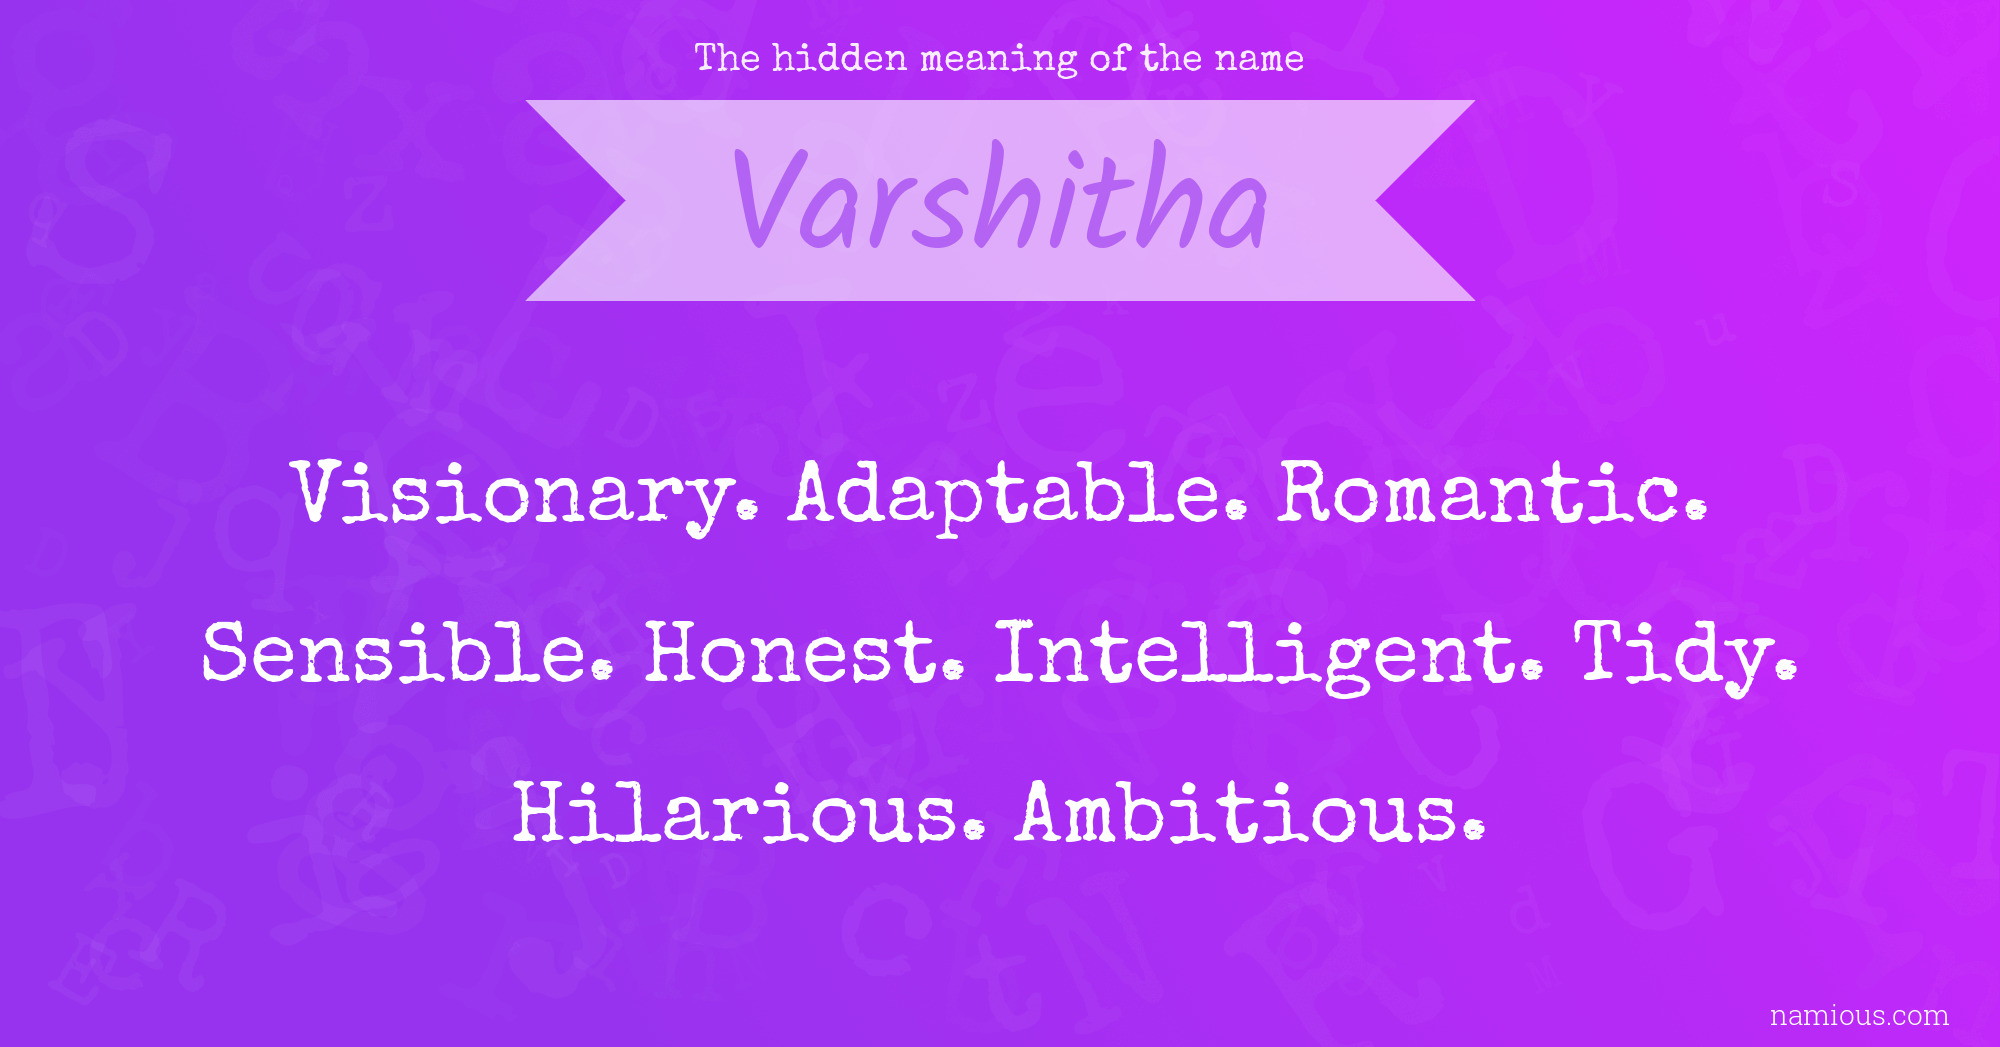 The hidden meaning of the name Varshitha